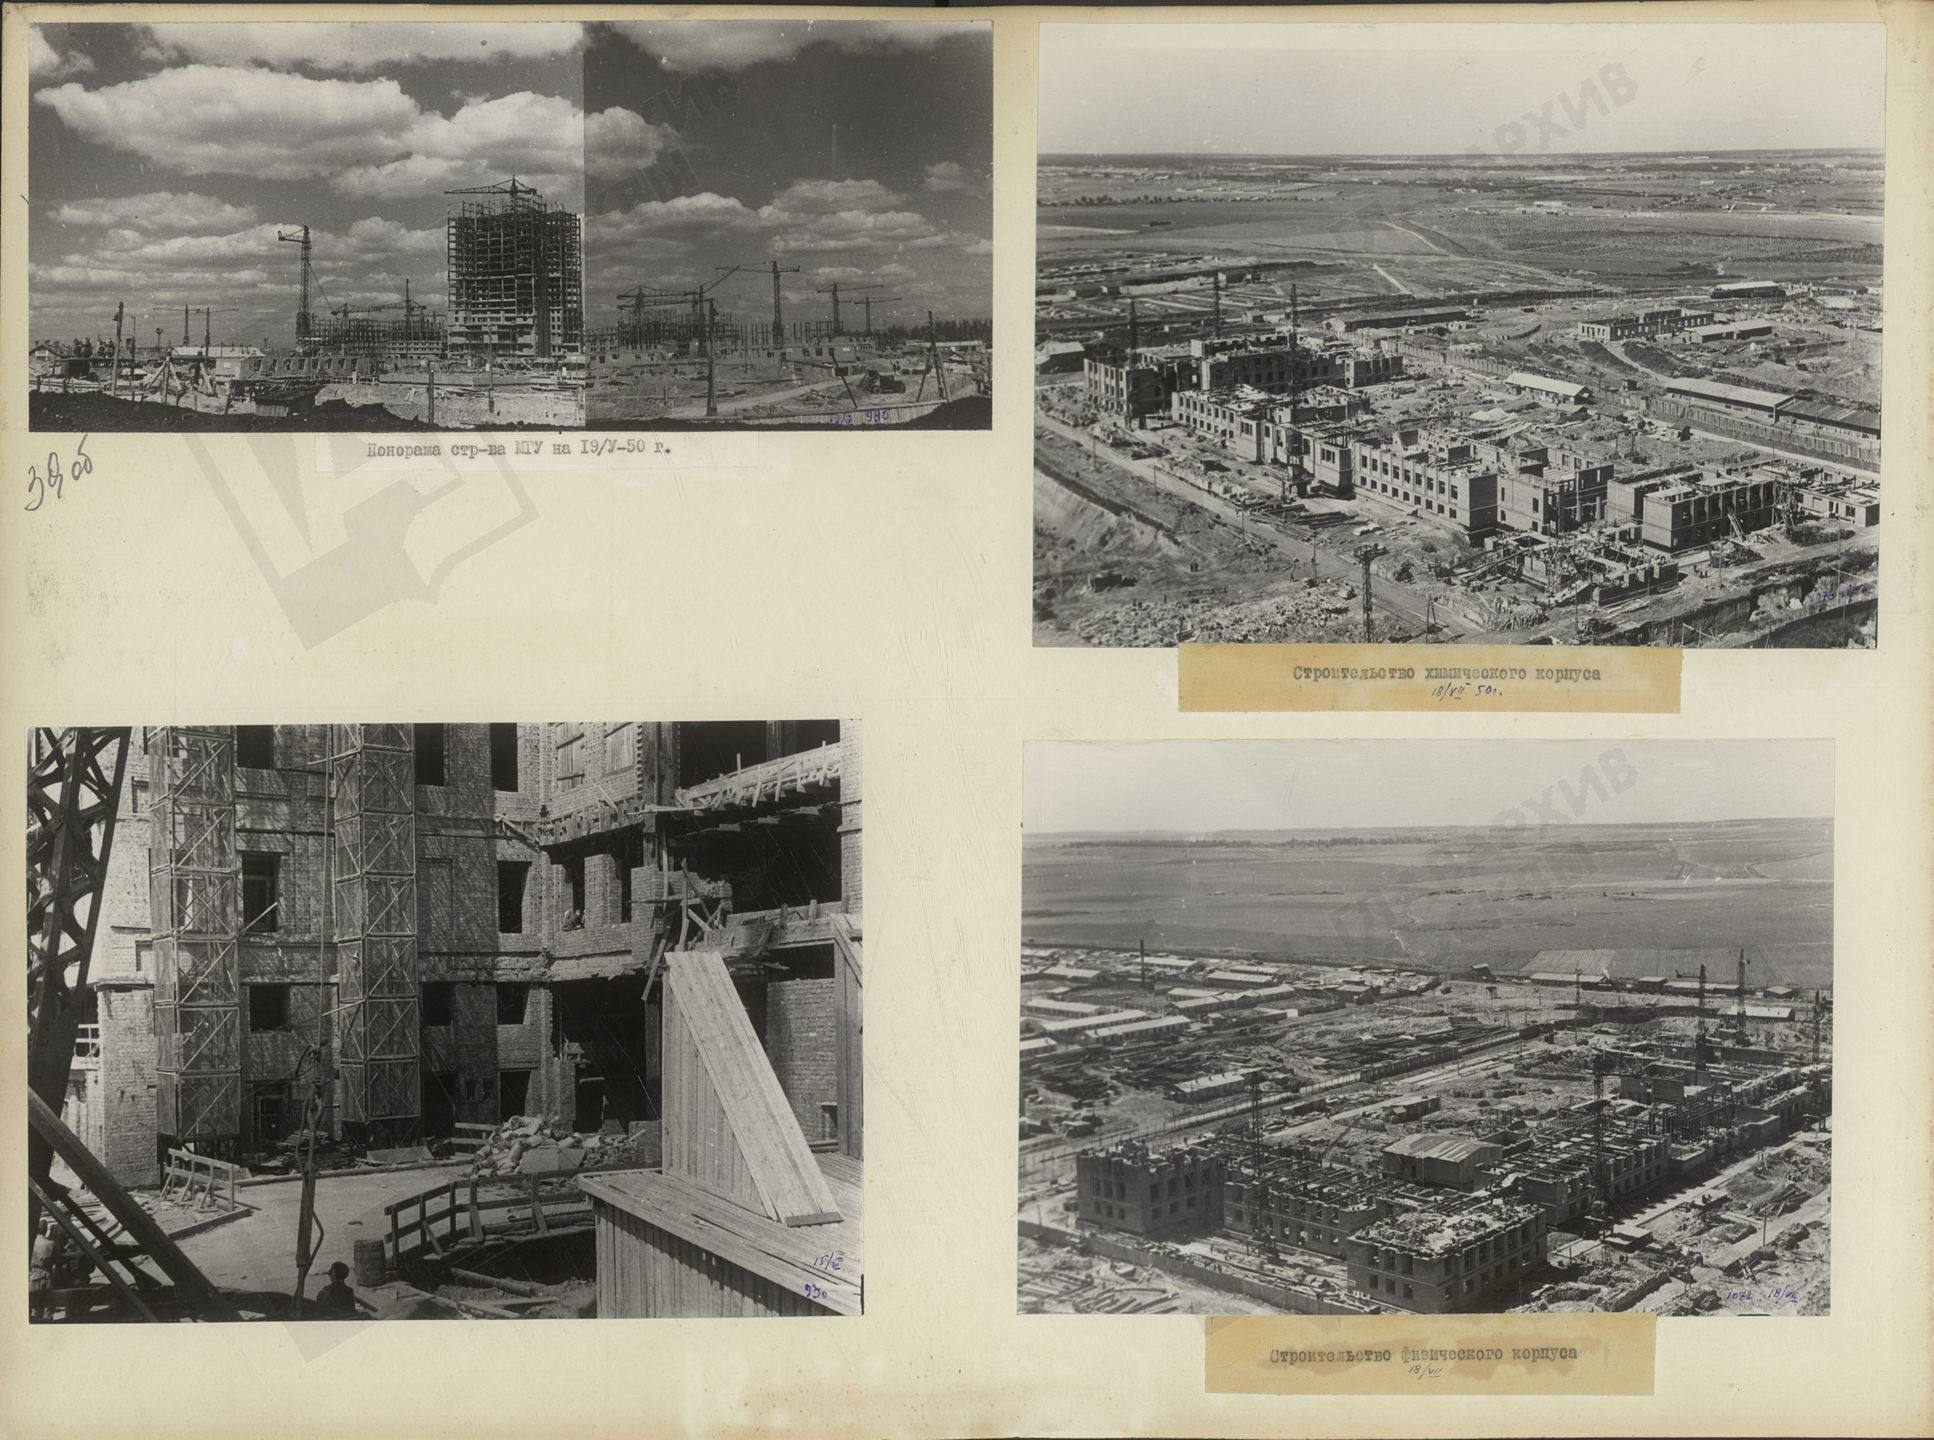 Construction of Moscow State University in photographs 1949-1951 - MSU, Building, The photo, Black and white photo, Moscow, Story, sights, Architecture, Historical photo, Longpost